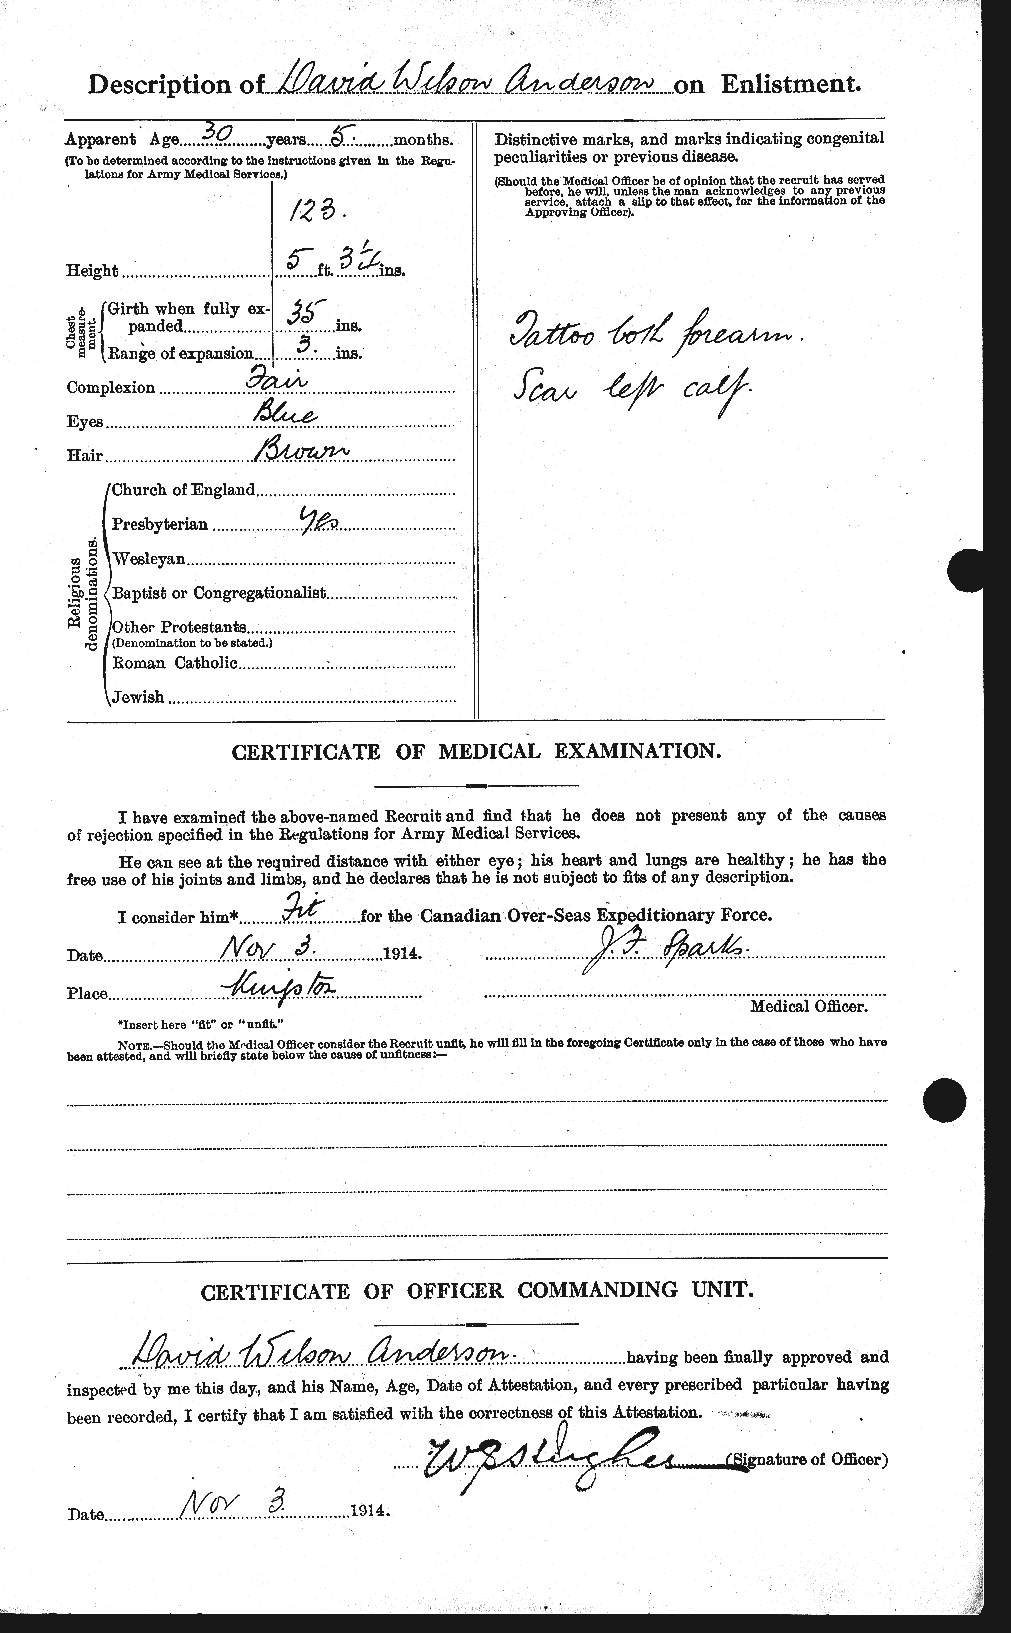 Personnel Records of the First World War - CEF 209995b